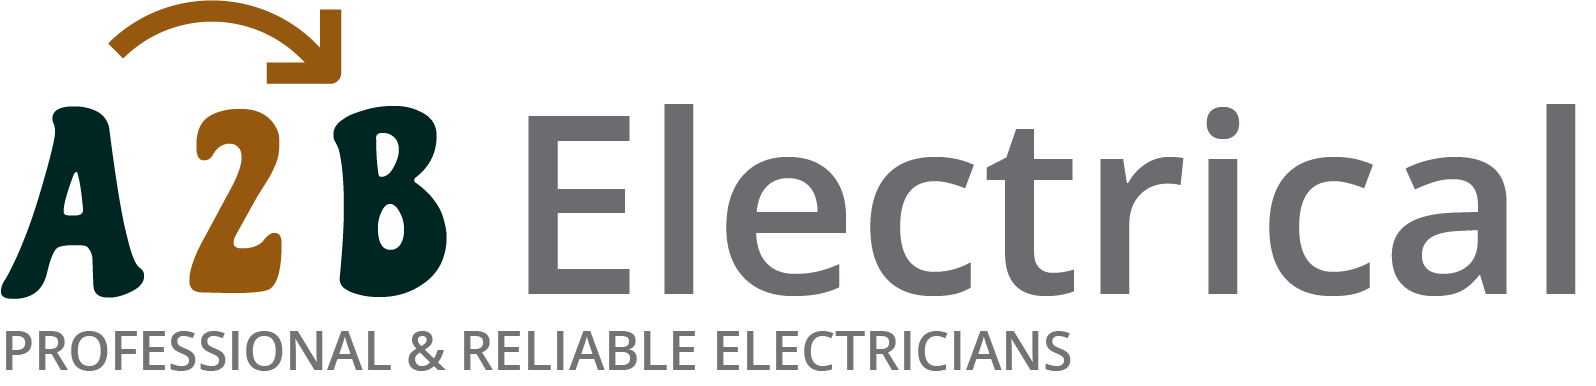 If you have electrical wiring problems in Cheltenham, we can provide an electrician to have a look for you. 